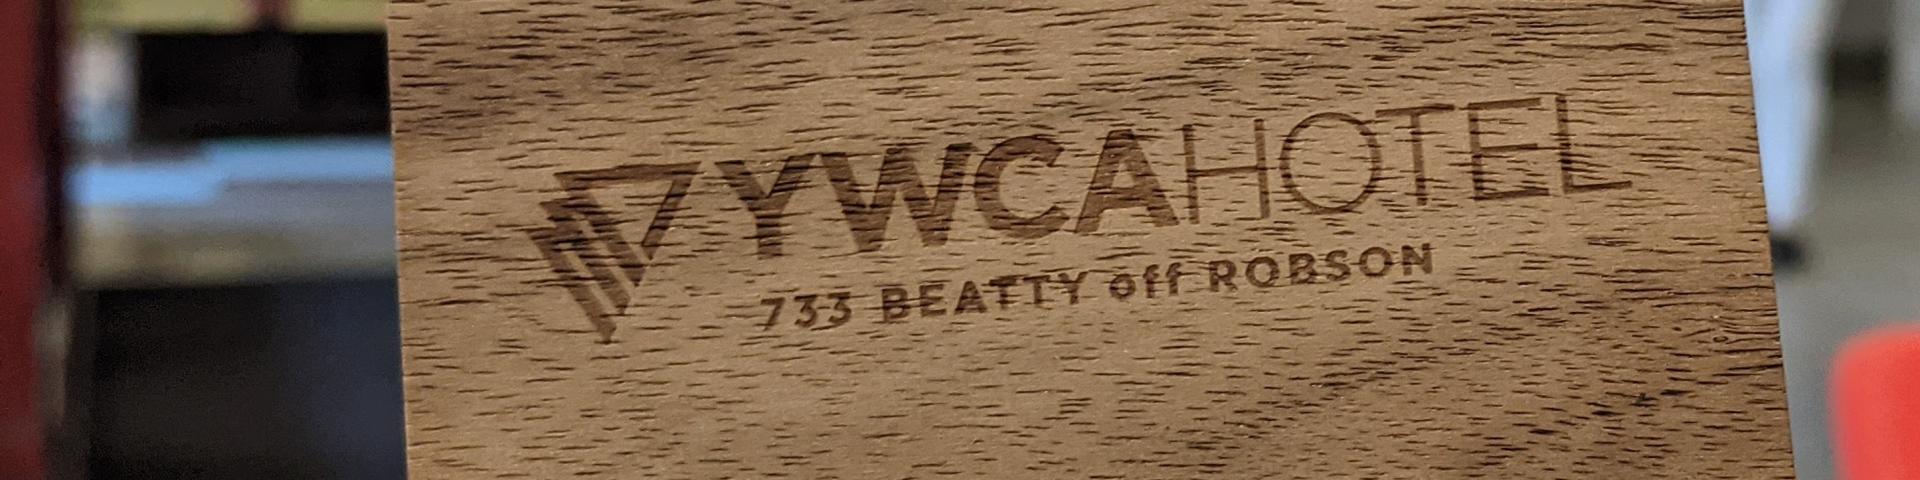 A photo of a wooden keycard from YWCA Hotel - sustainability